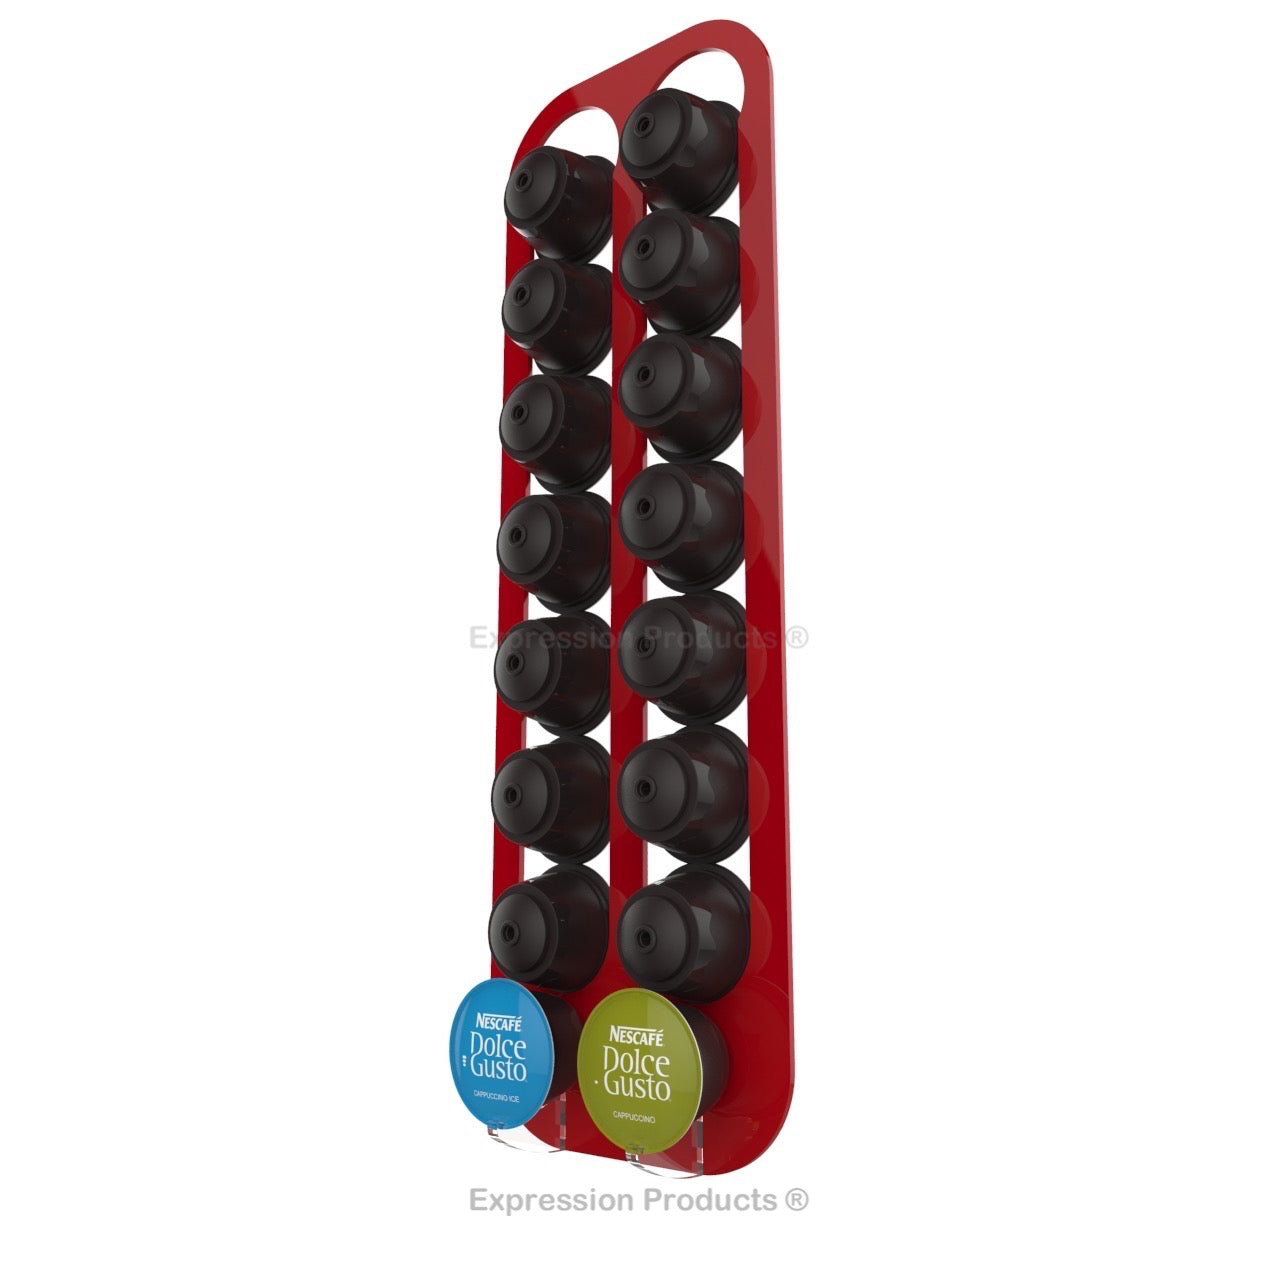 Dolce Gusto Coffee Pod Holder, Wall Mounted.  Shown in Red Holding 16 Pods